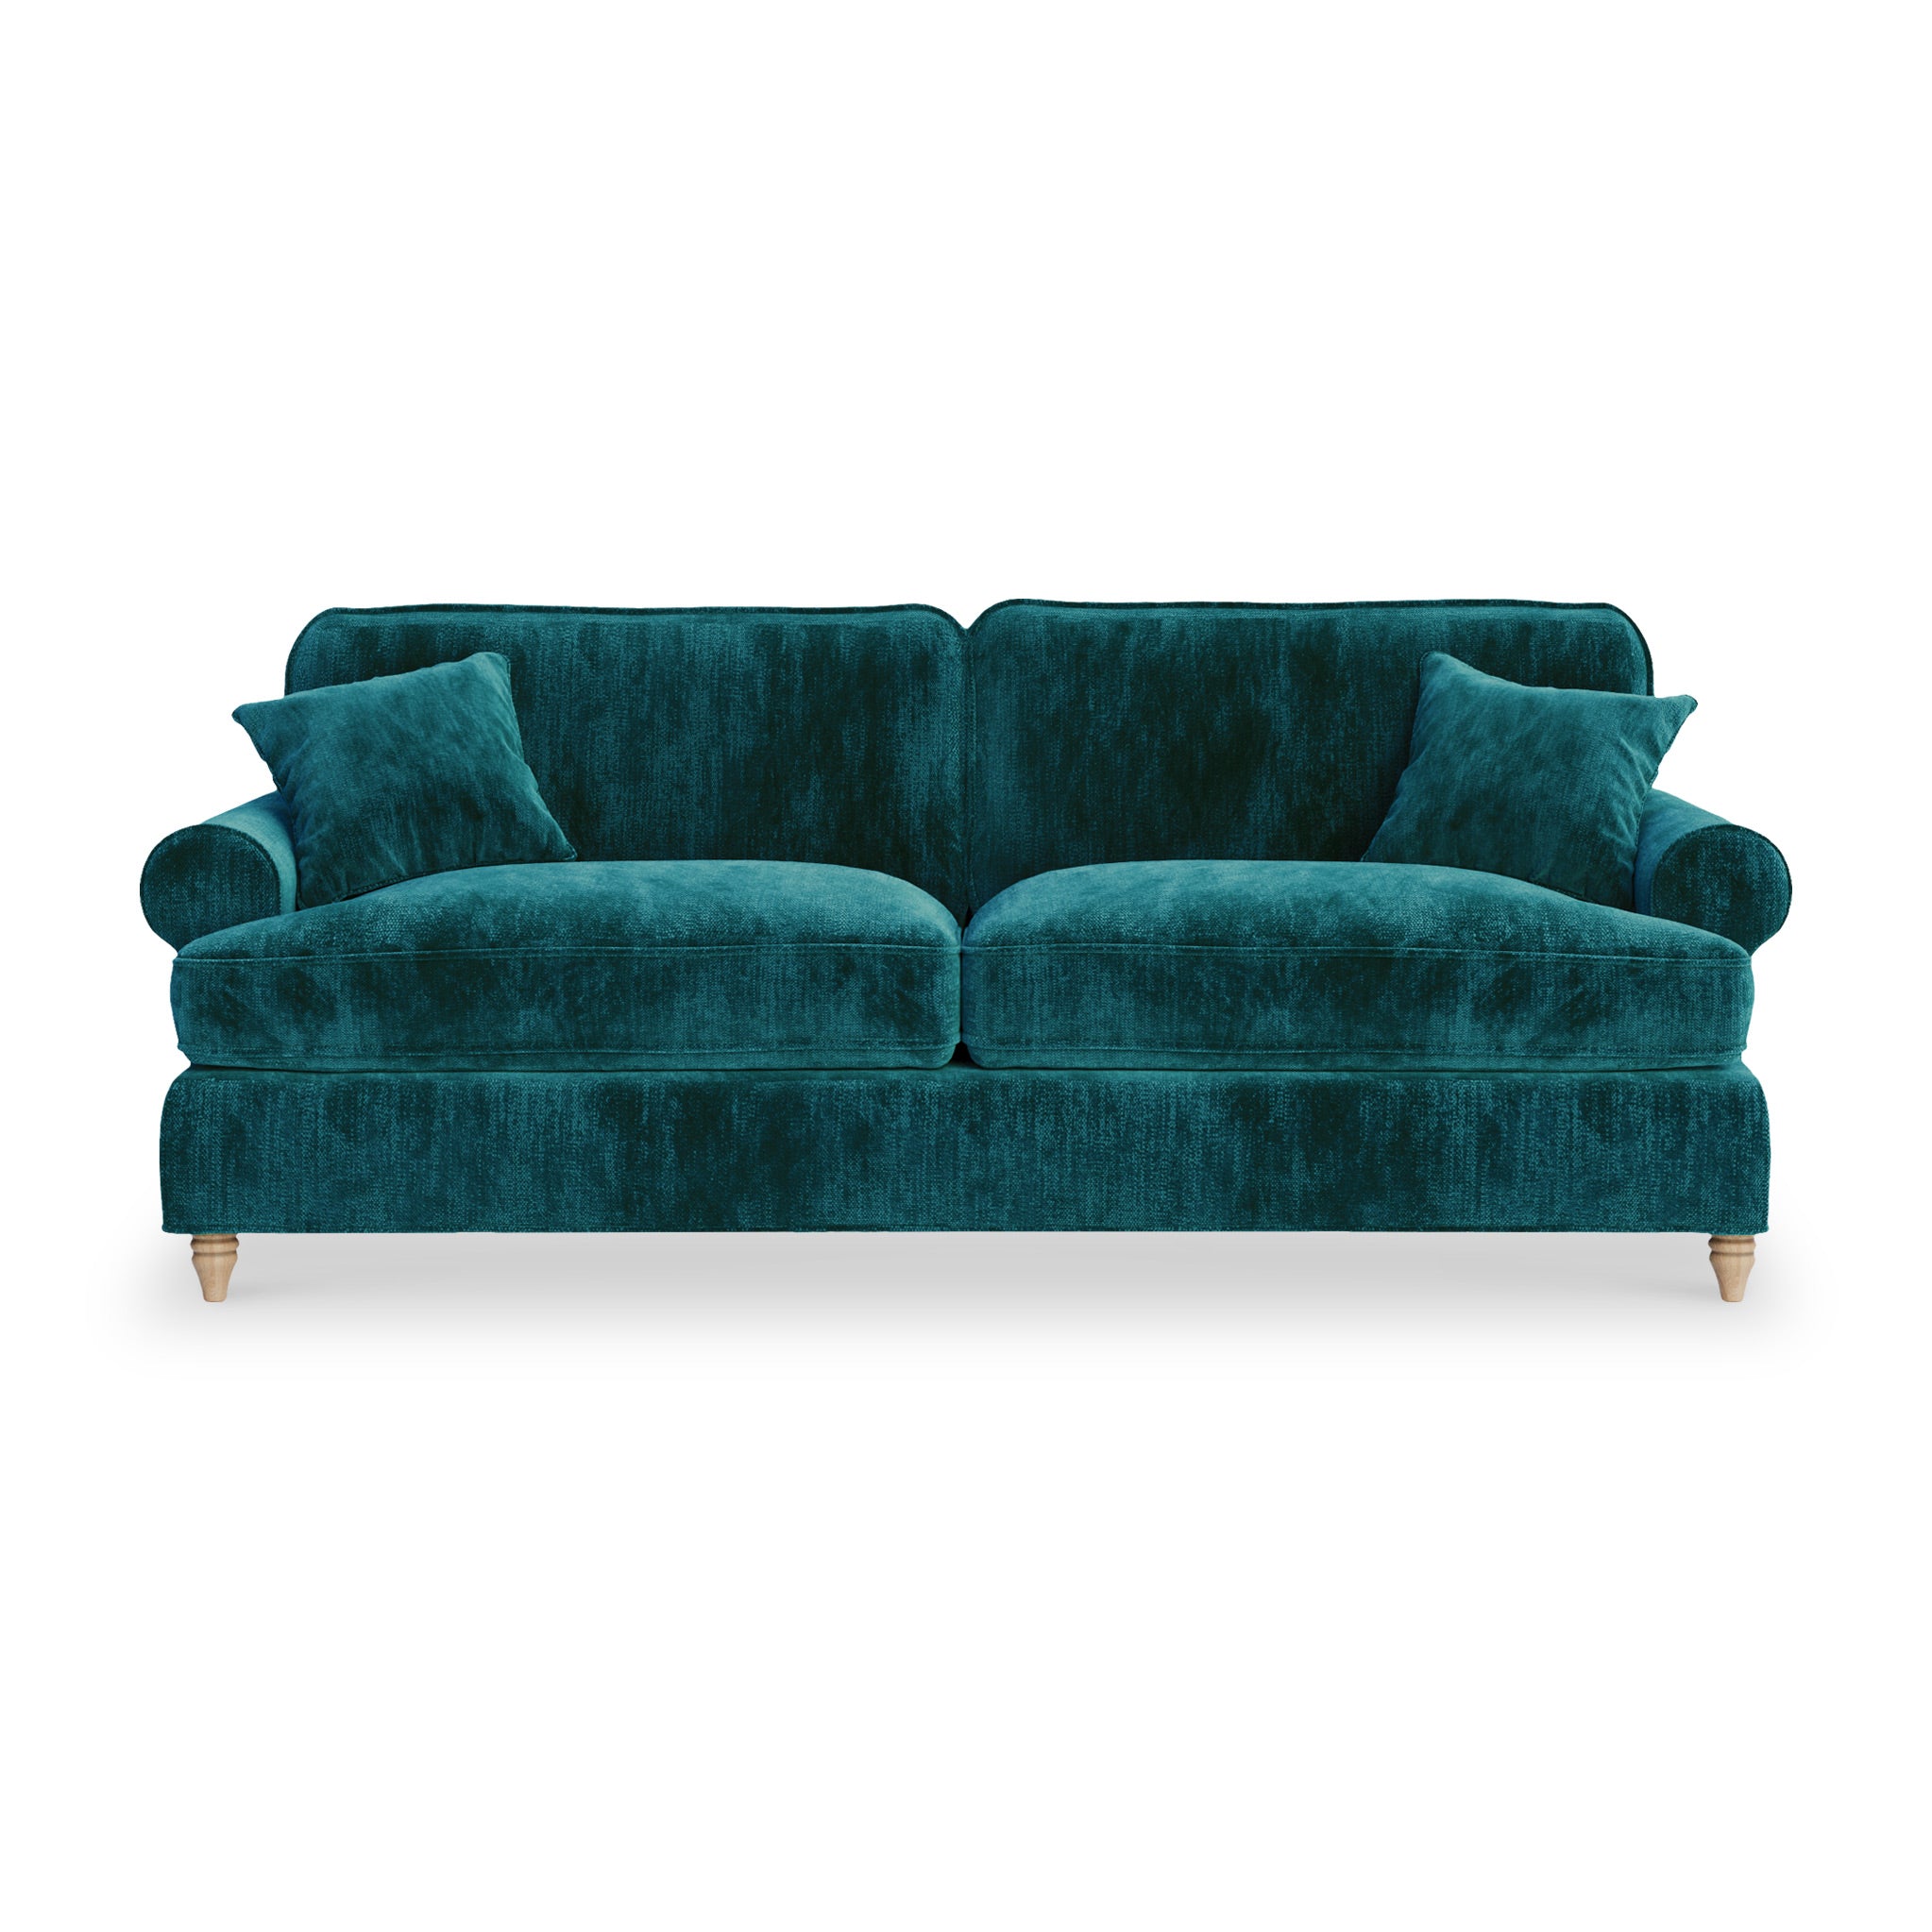 Alfie 4 Seater Sofa 8 Chenille Colours Made In The Uk Roseland